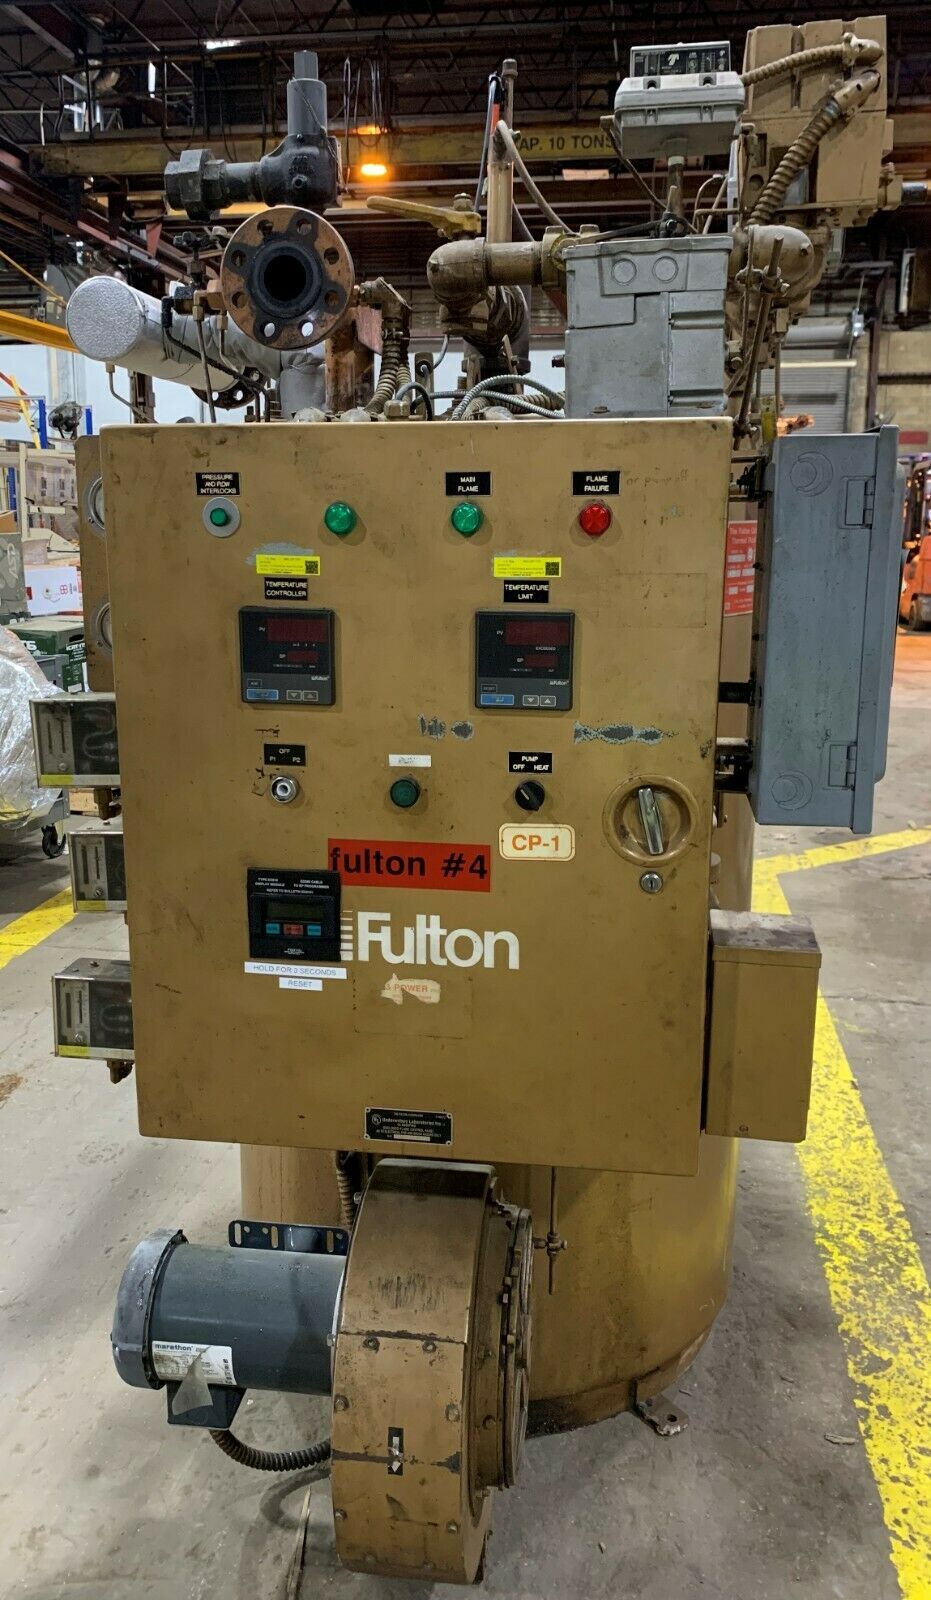 FULTON FT-0160C Chillers, Boilers, and HVAC | ESS INDUSTRIAL